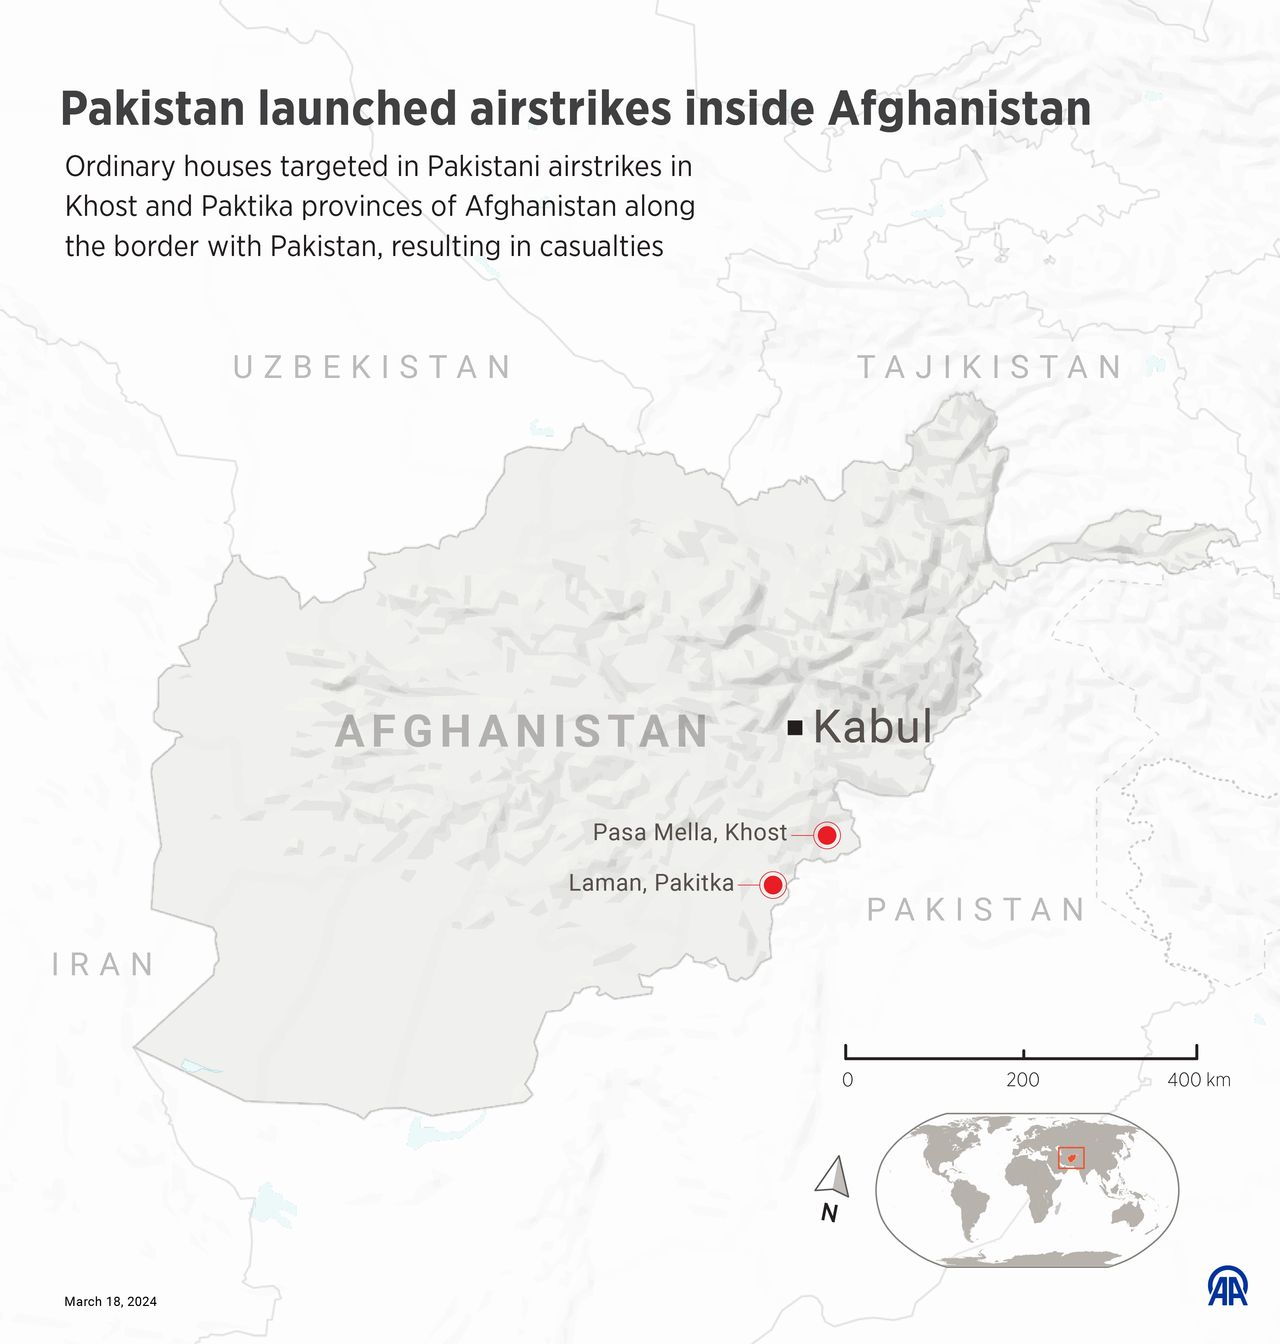 Pakistan intensifies military actions with airstrikes in Afghanistan